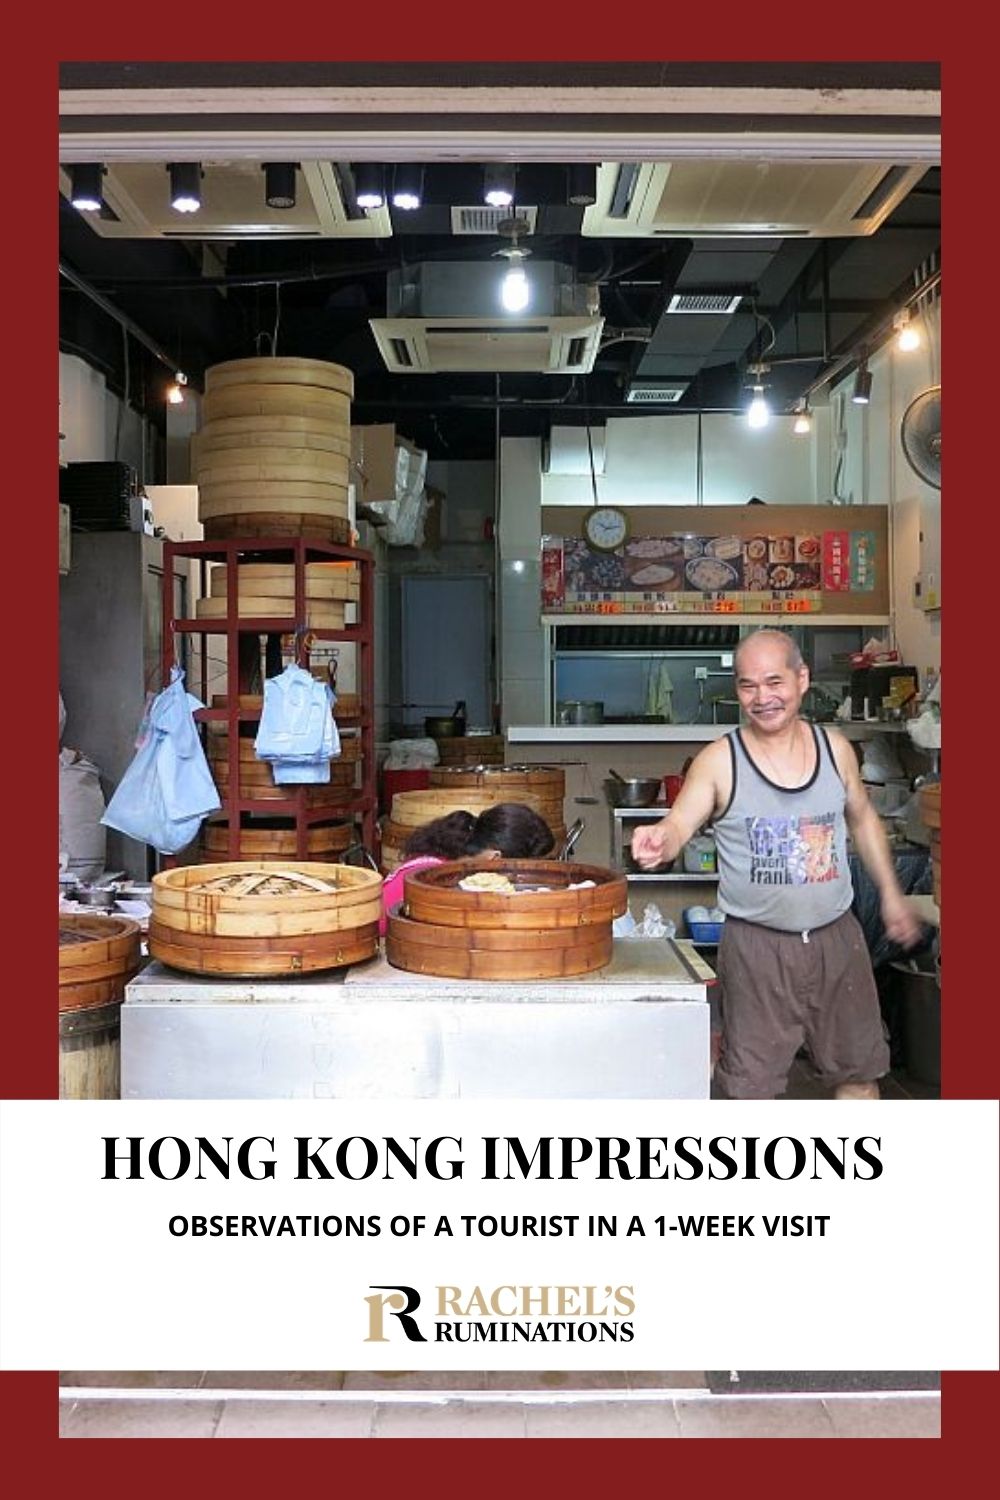 My short visit in Hong Kong was a stimulating, perhaps over-stimulating, series of strong impressions. Here are some of the strongest ones. via @rachelsruminations